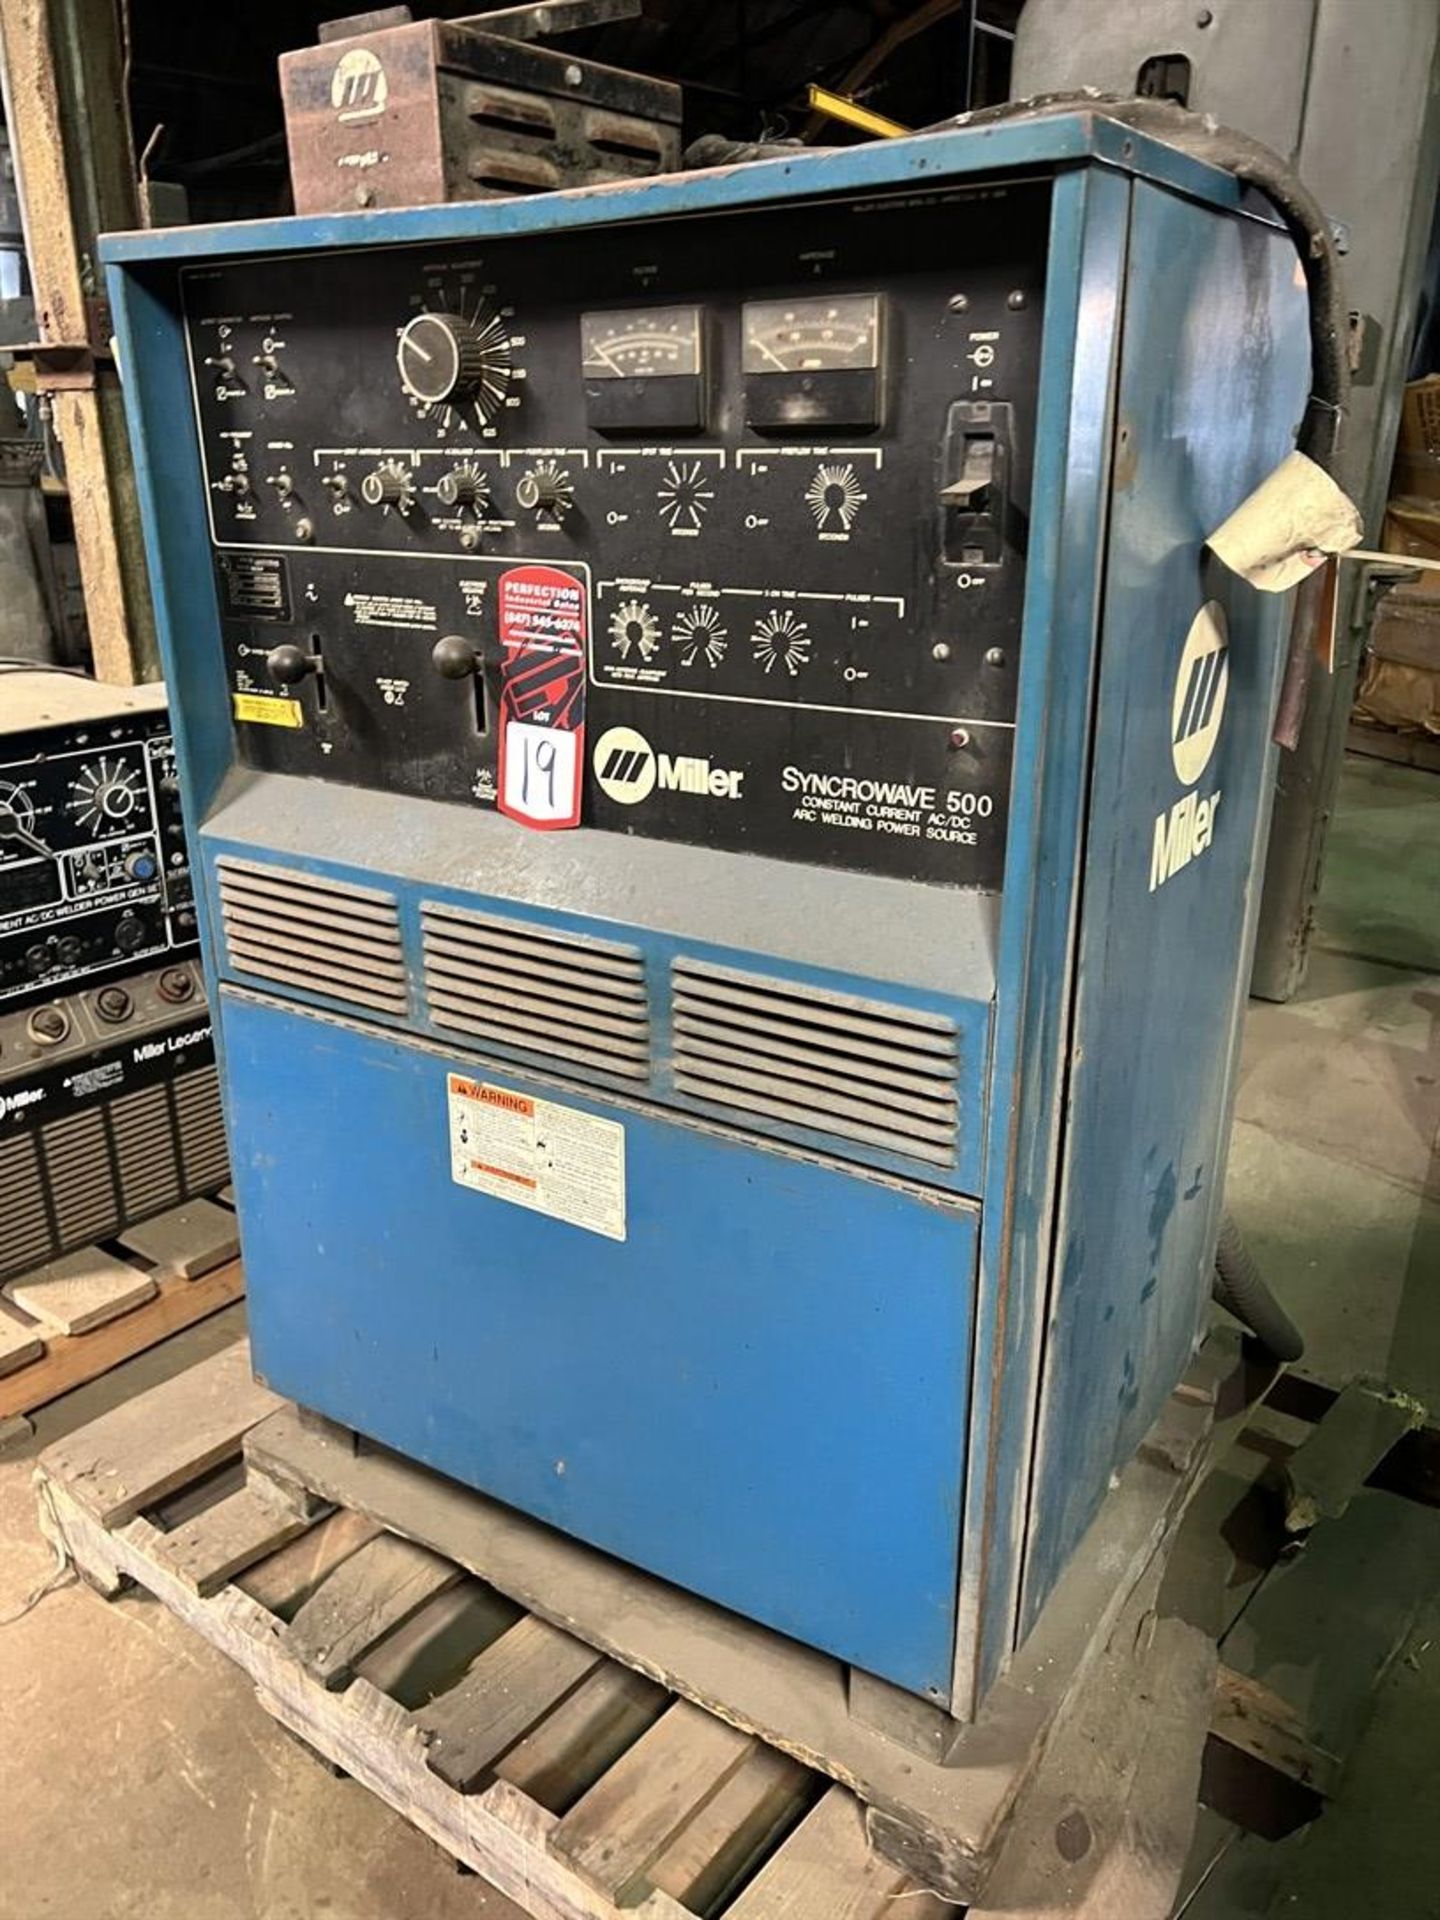 MILLER Syncrowave 500 Arc Welding Power Source, s/n KC191745 (Building 39) - Image 2 of 4